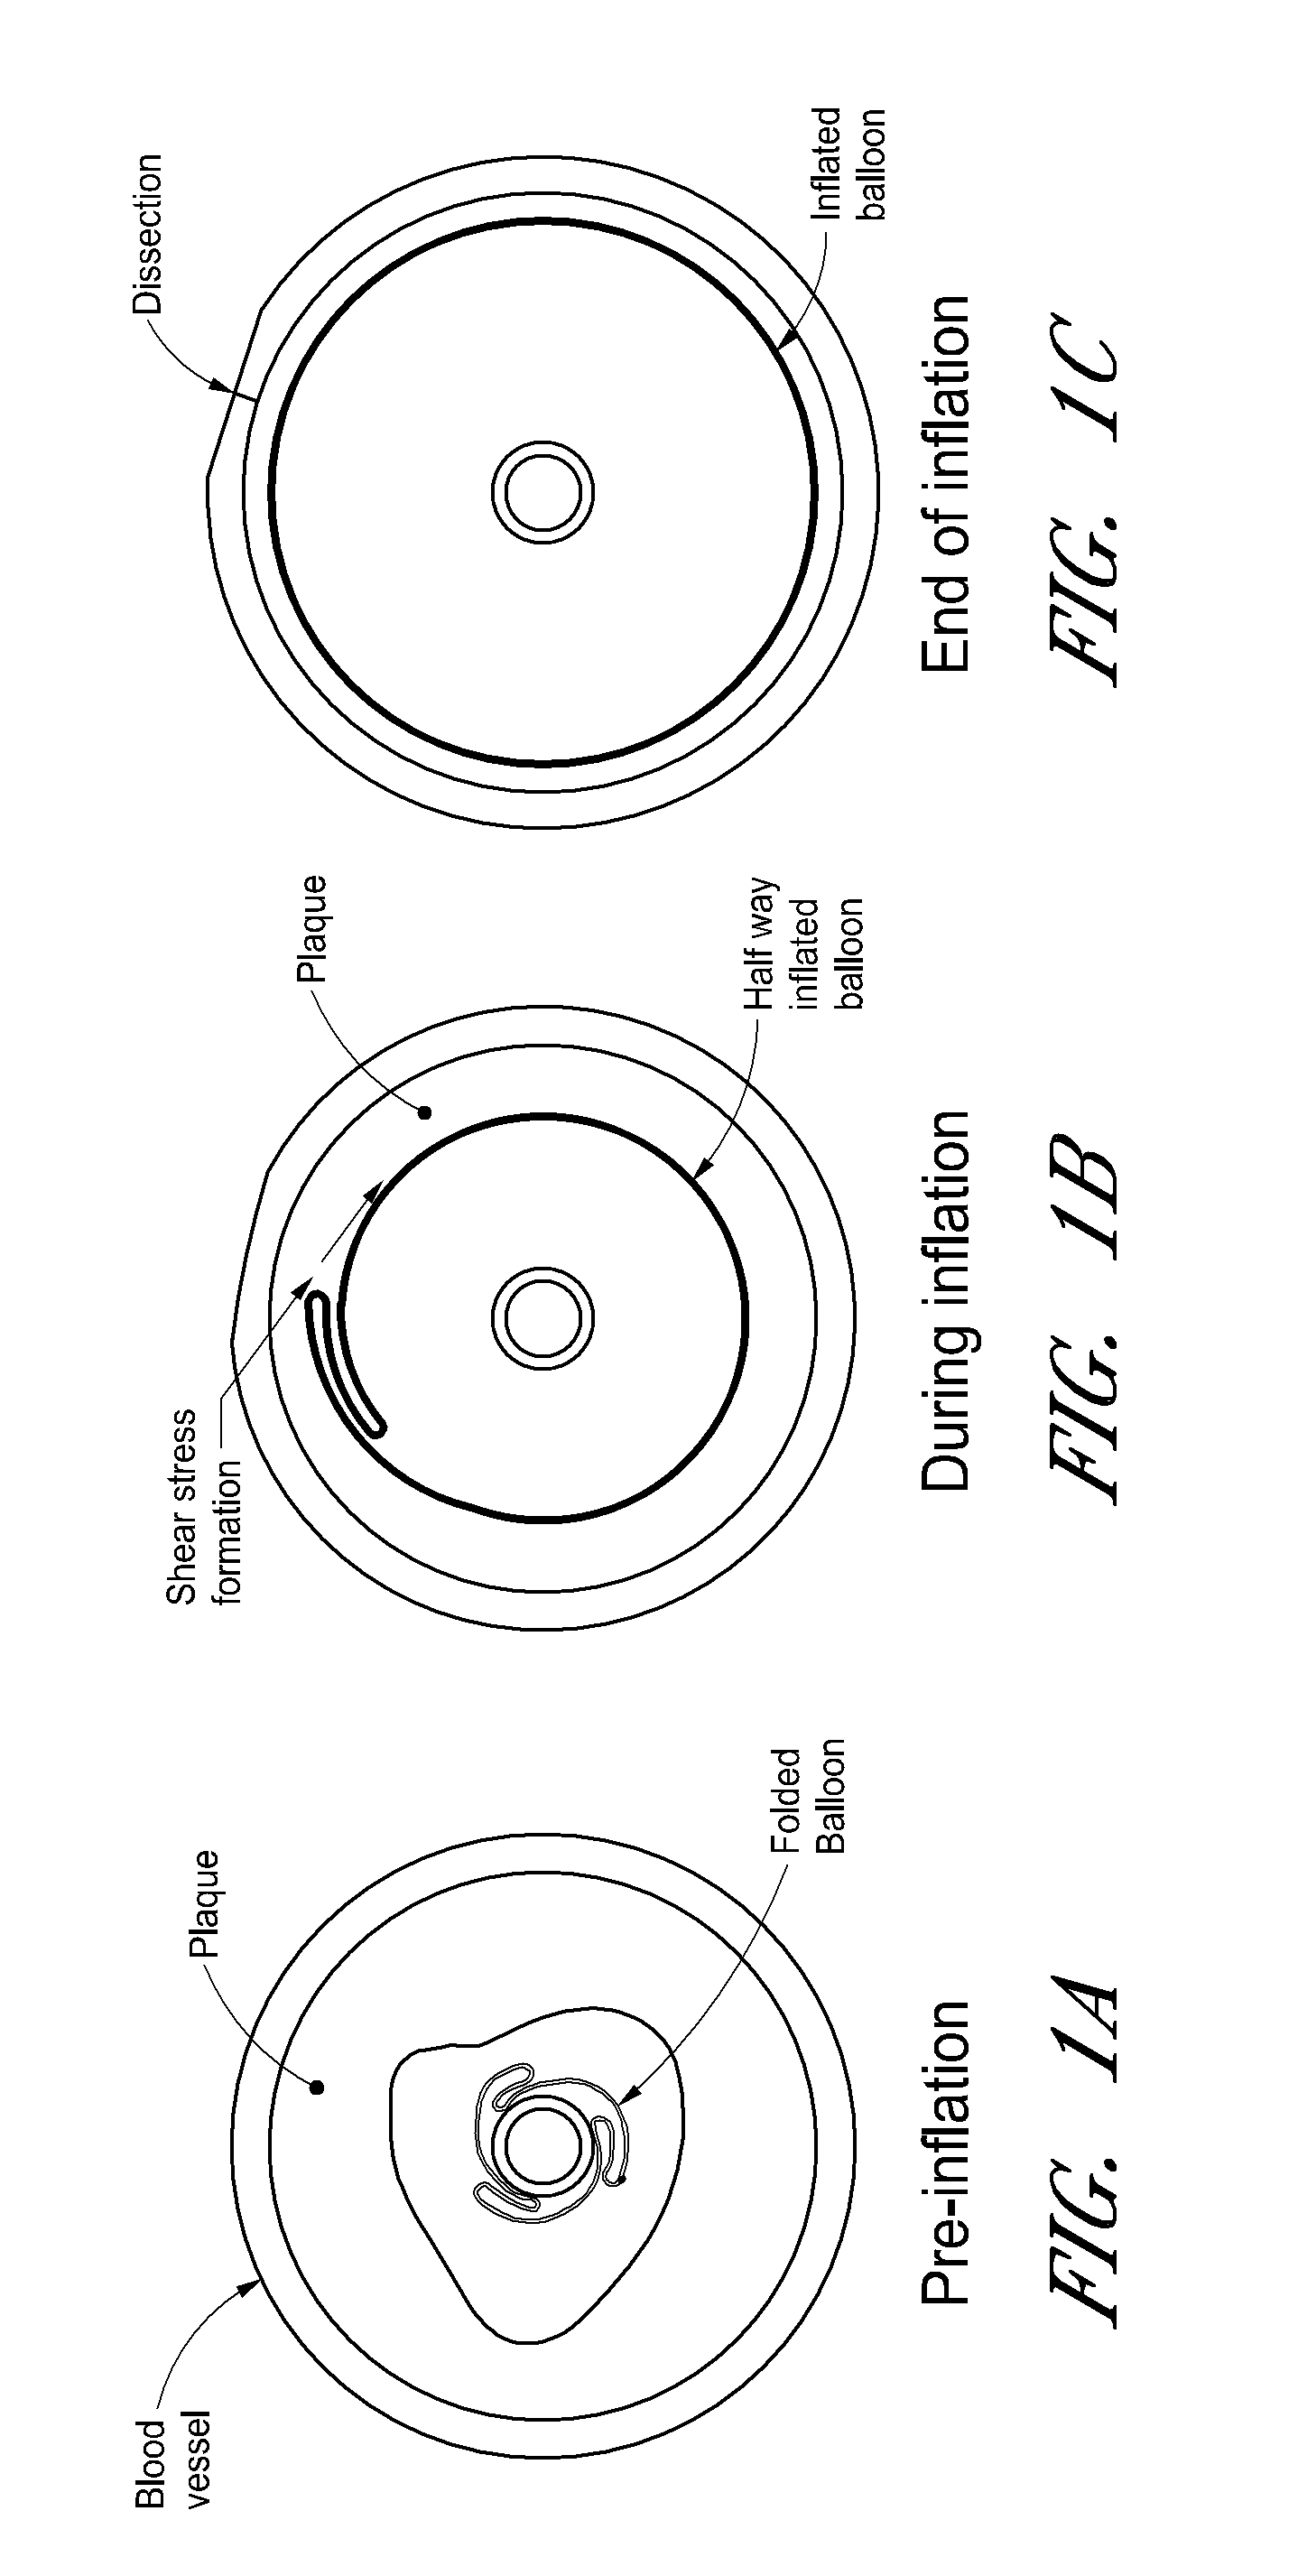 Device for compartmental dilatation of blood vessels